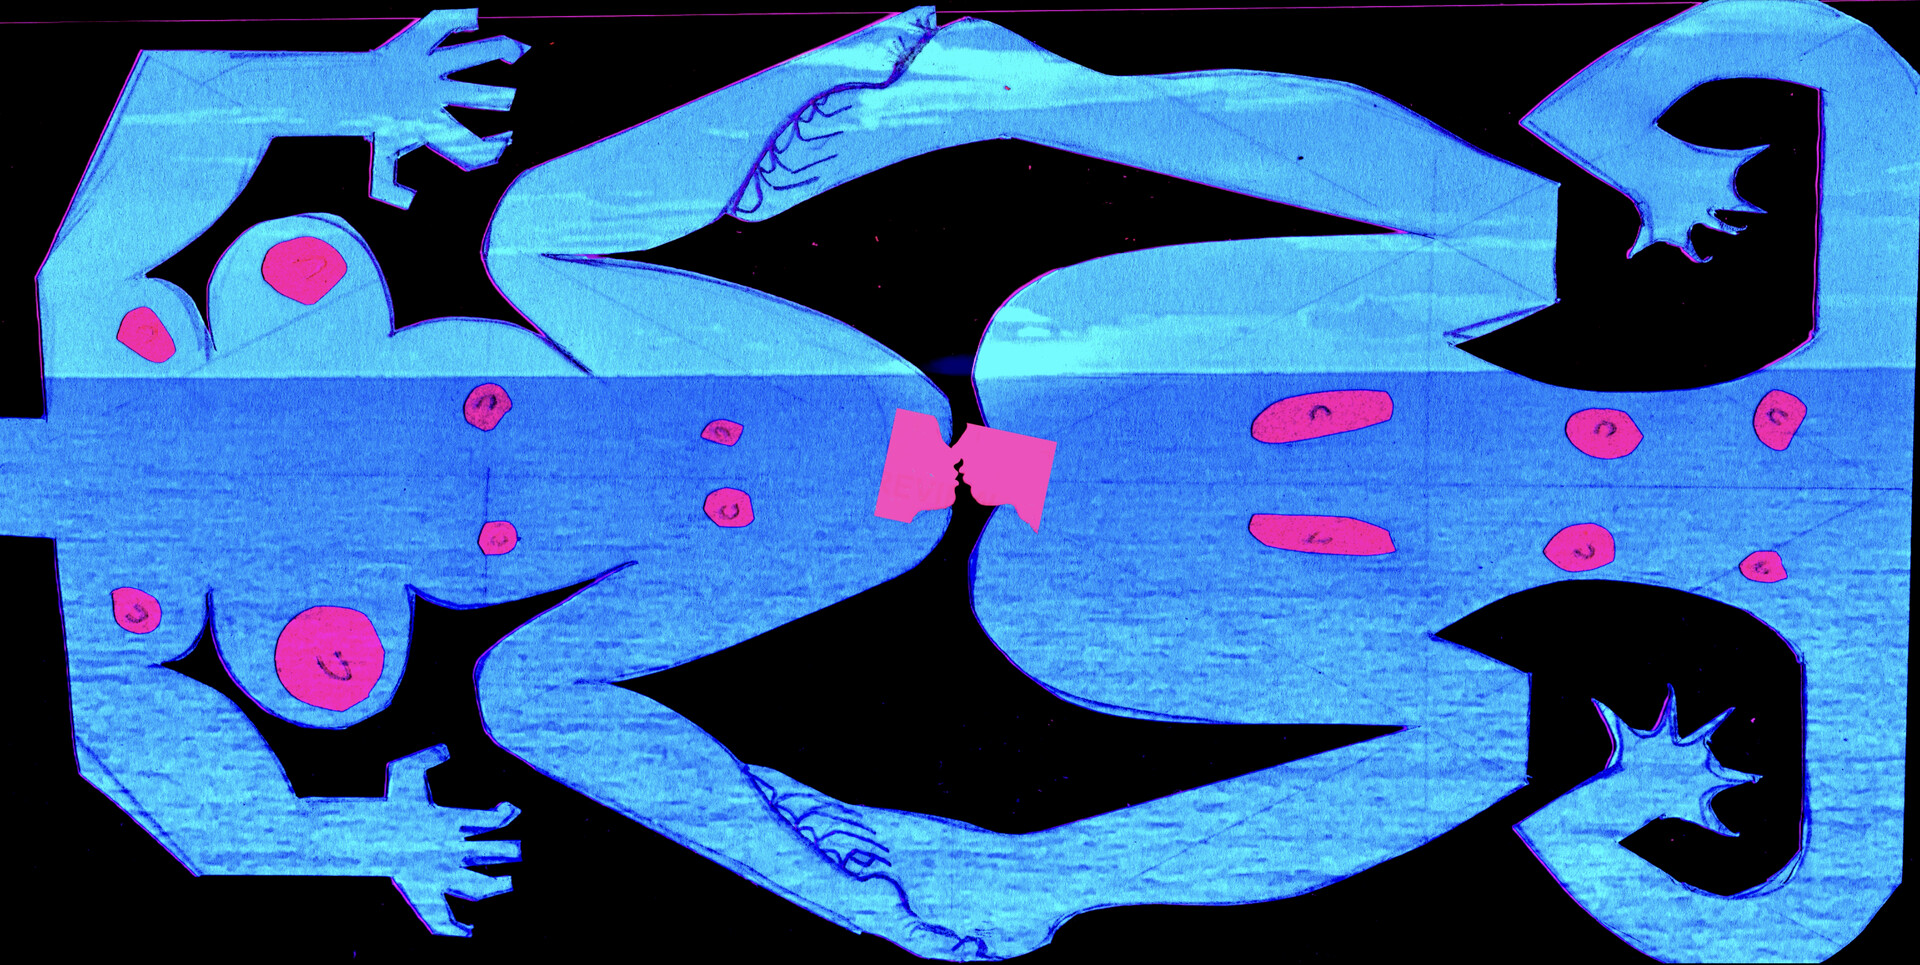 Abstract image in blue of humanoid bodies with faces, below the foreheads, with mouths as sex orgrans